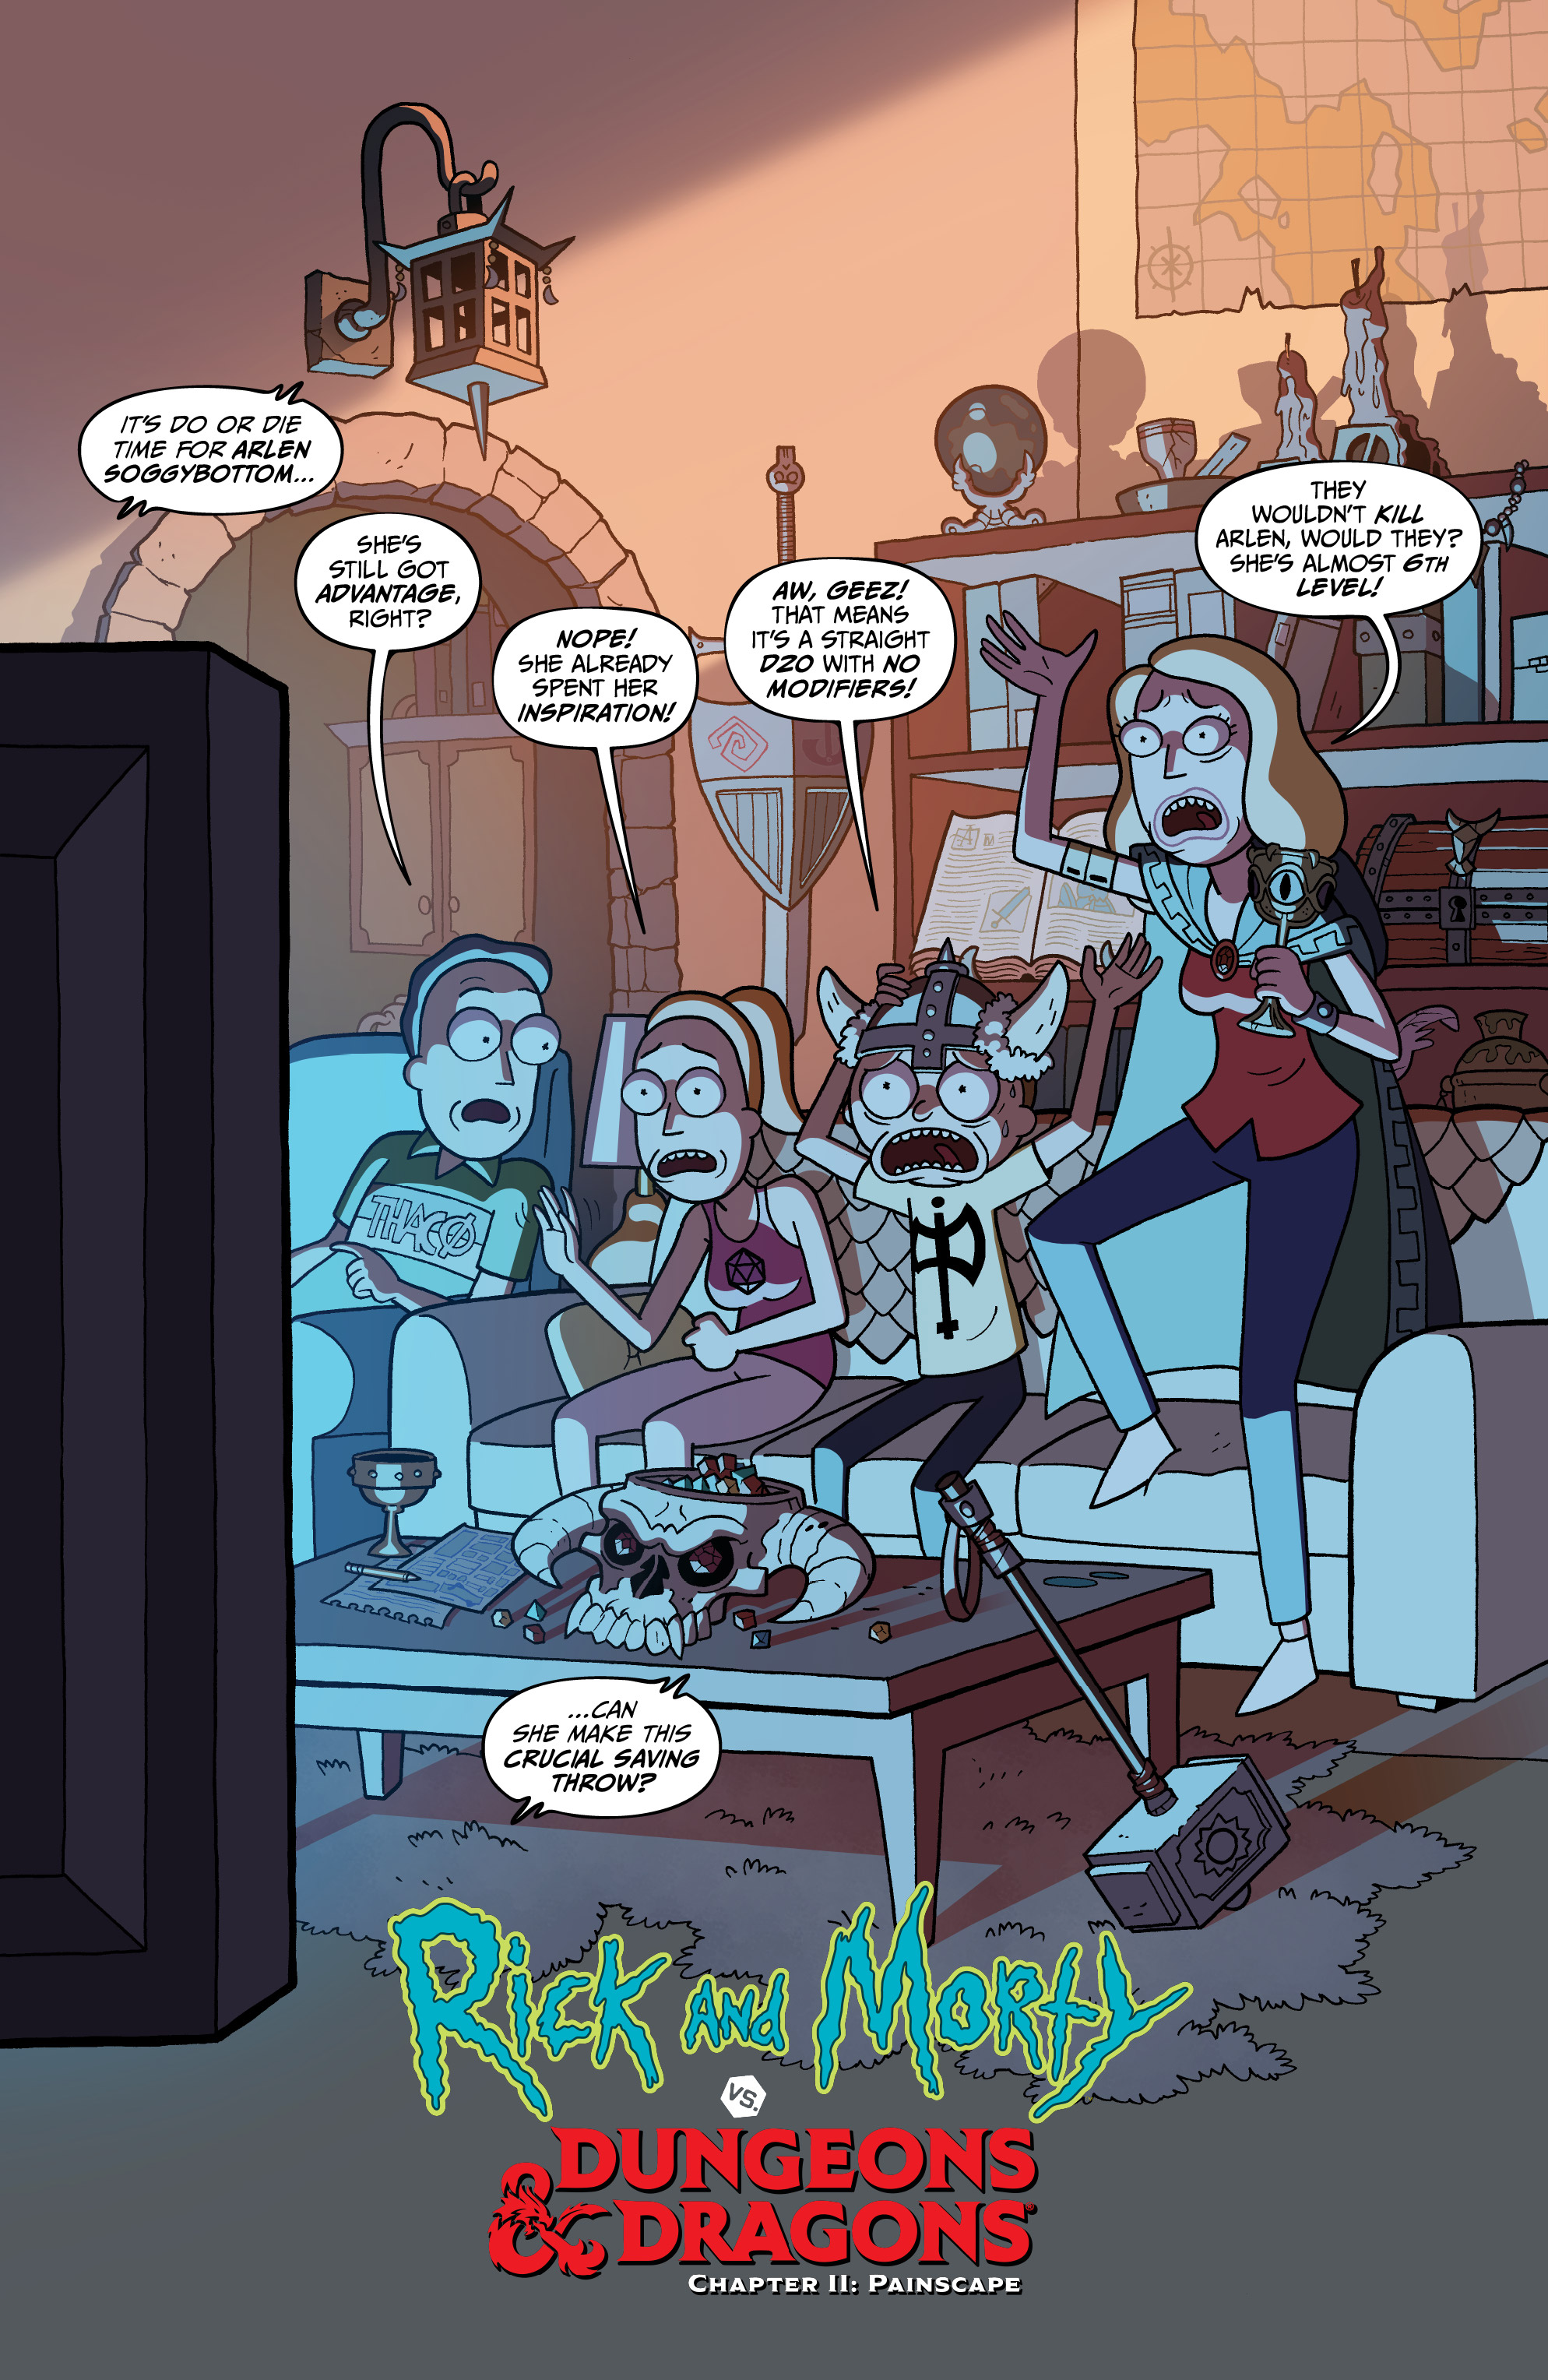 Read online Rick and Morty vs. Dungeons & Dragons II: Painscape comic -  Issue #1 - 3